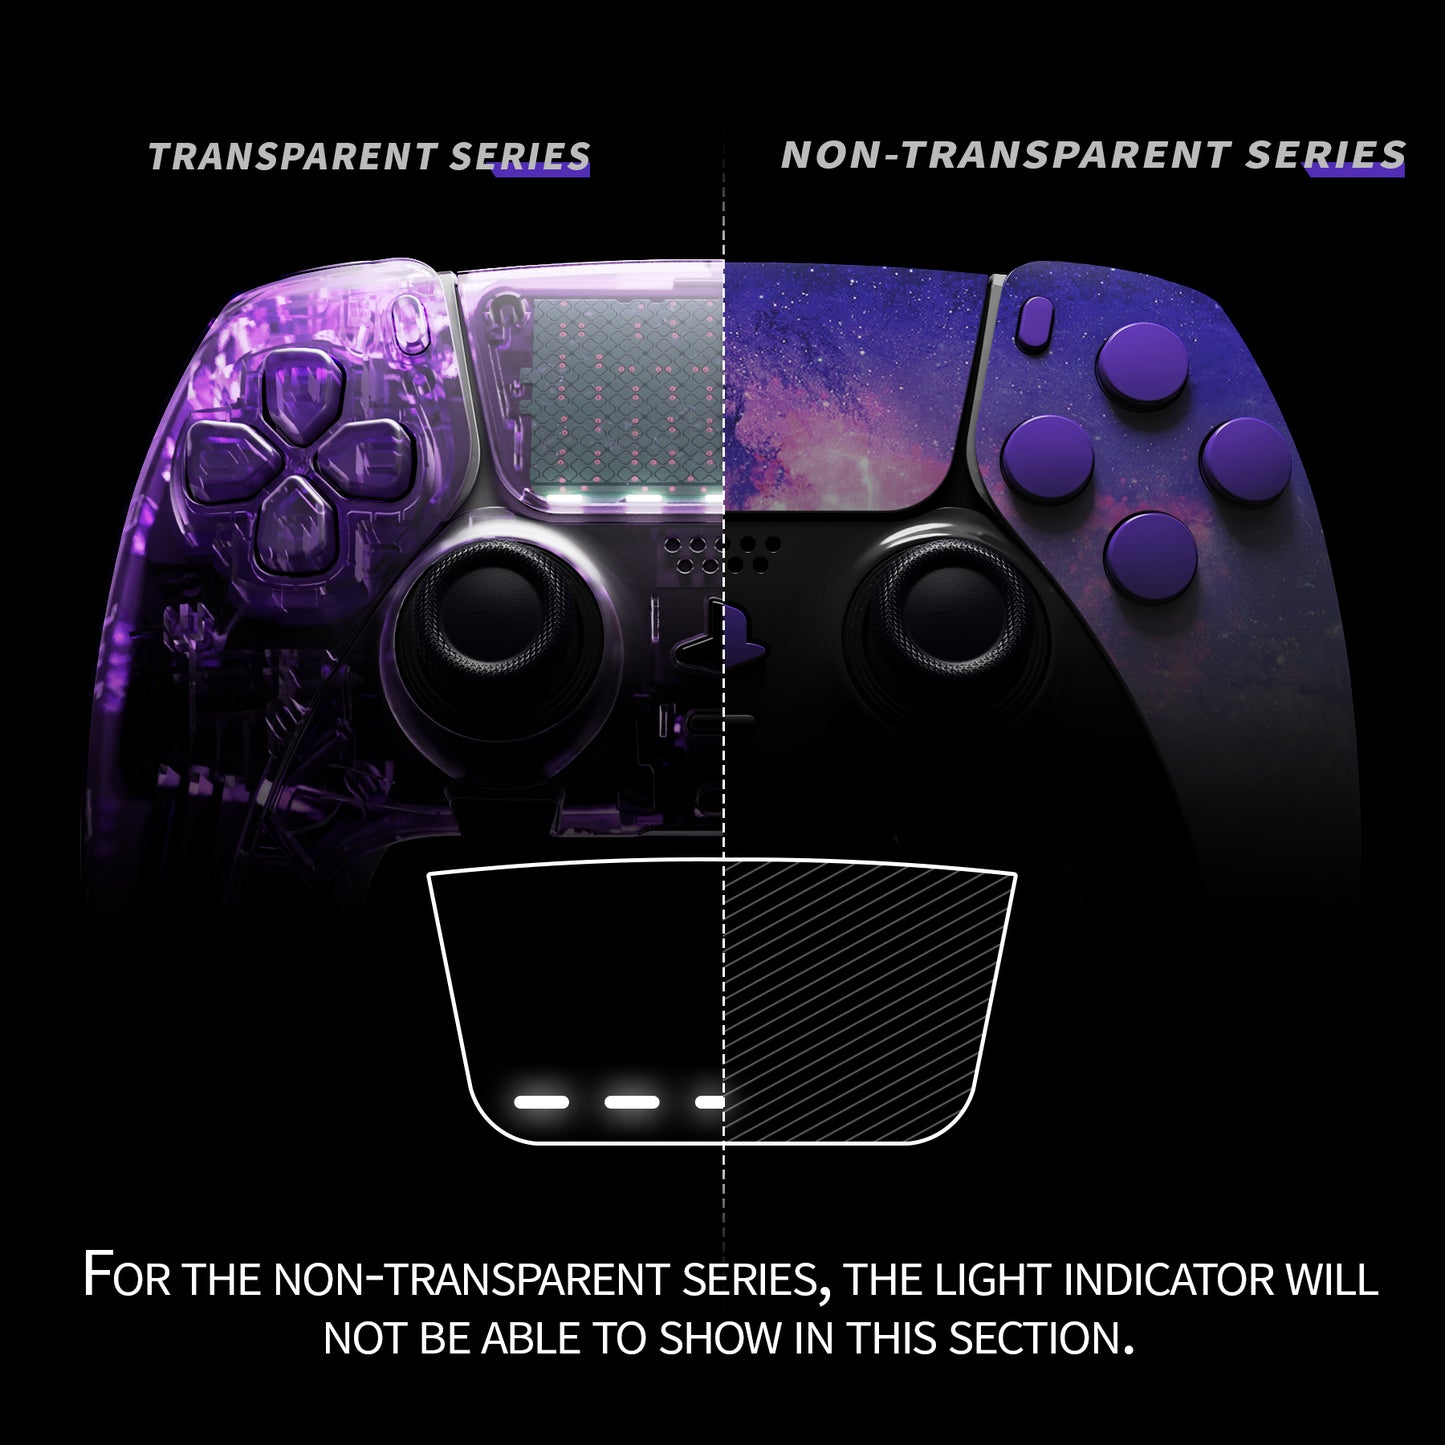 Replacement Full Set Shells with Buttons Compatible with PS5 Edge Controller - Nebula Galaxy eXtremeRate